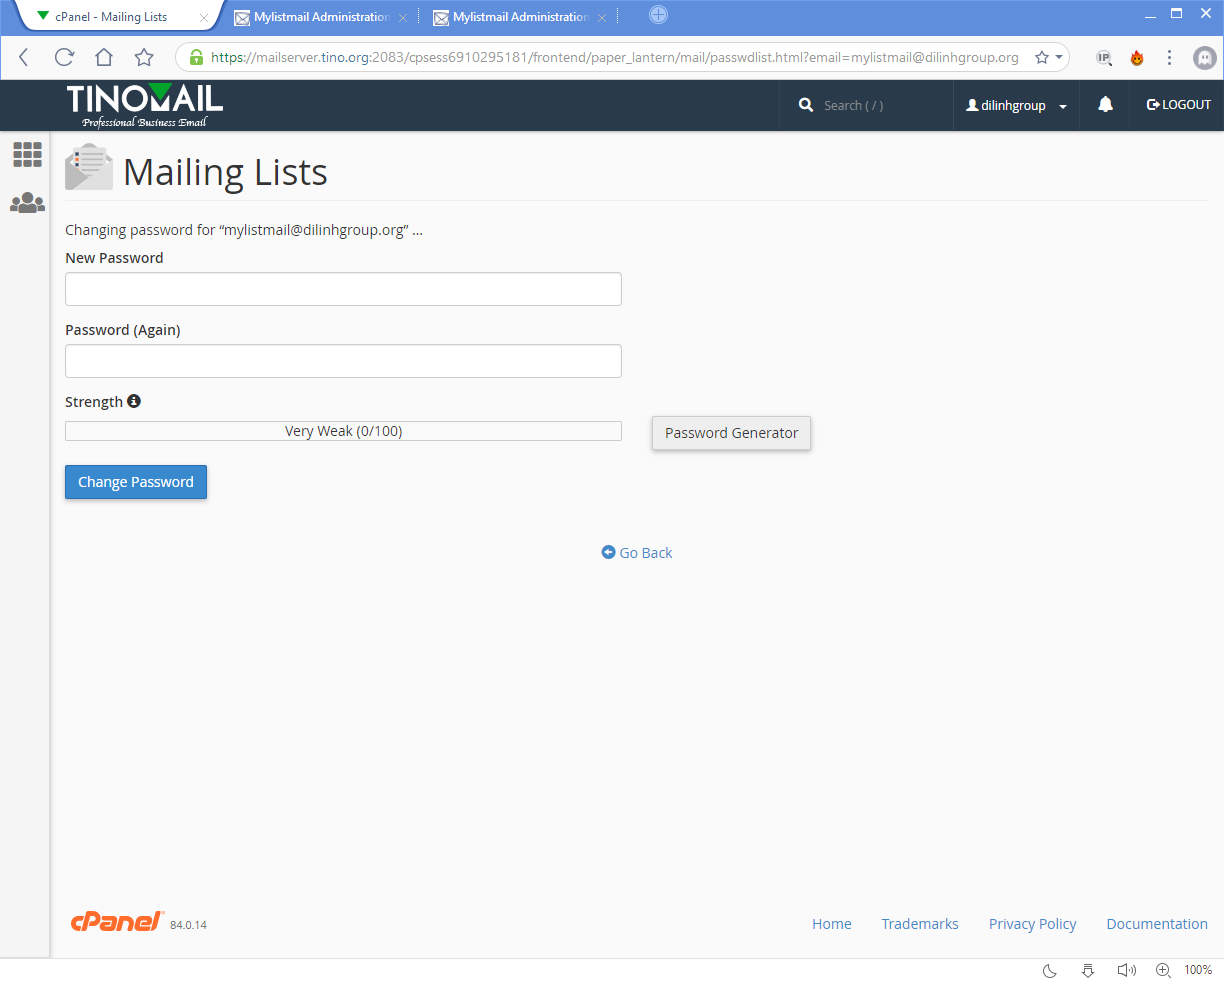 [cPanel] - Mailing Lists 20